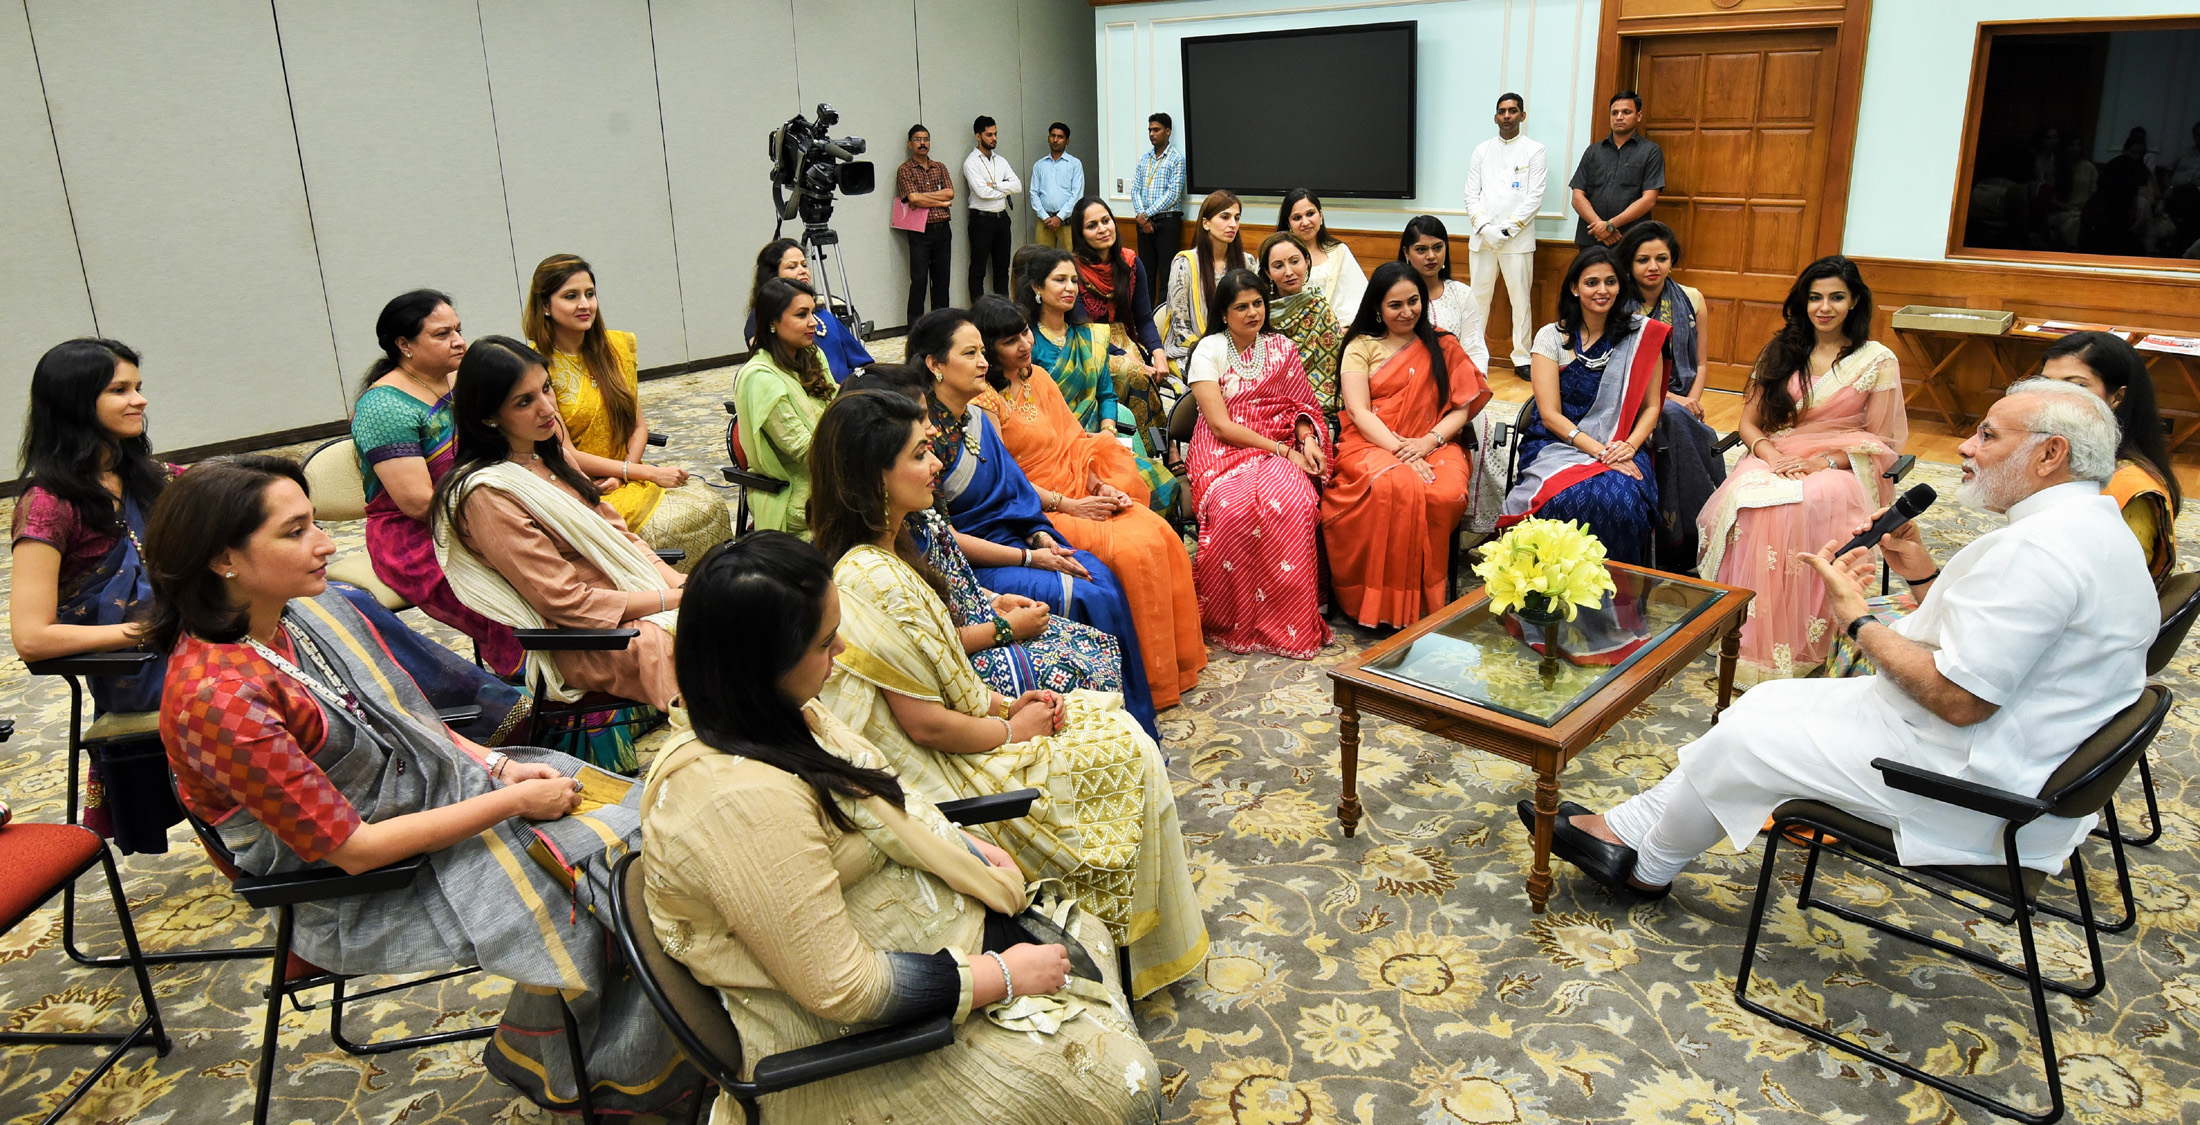 Delegation from Young FICCI Ladies Organisation calling on the Prime Minister, Shri Narendra Modi, in New Delhi on August 03, 2017.